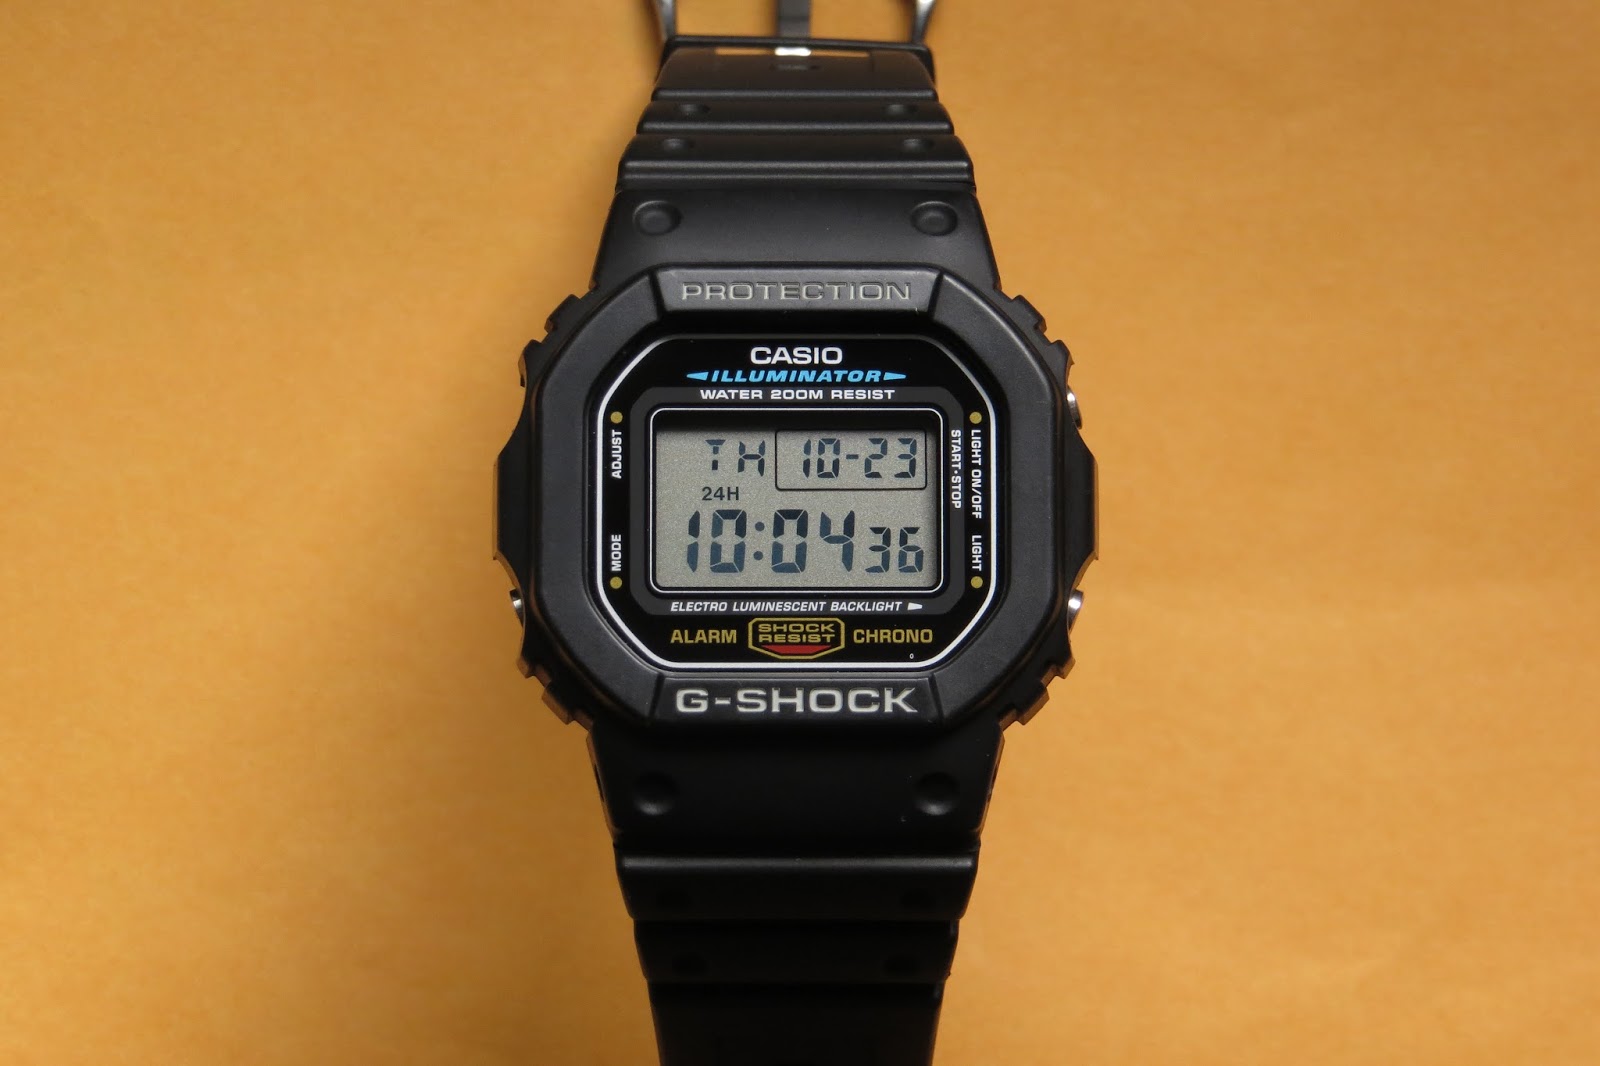 The Watch Post: Review of Casio G-Shock DW-5600E-1V - Simplicity Done Right